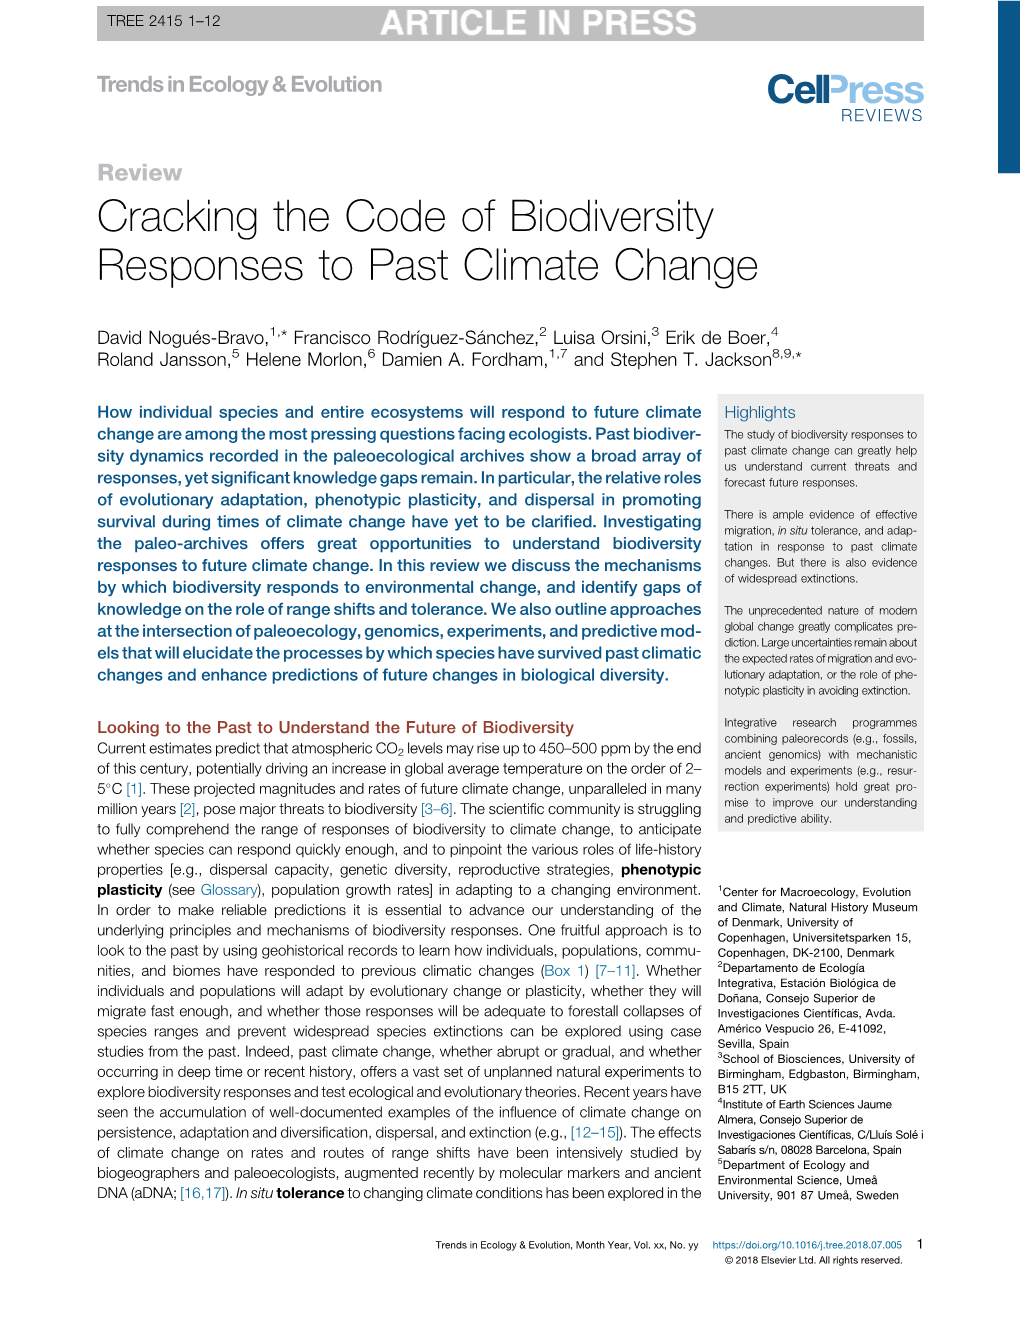 Cracking the Code of Biodiversity Responses to Past Climate Change